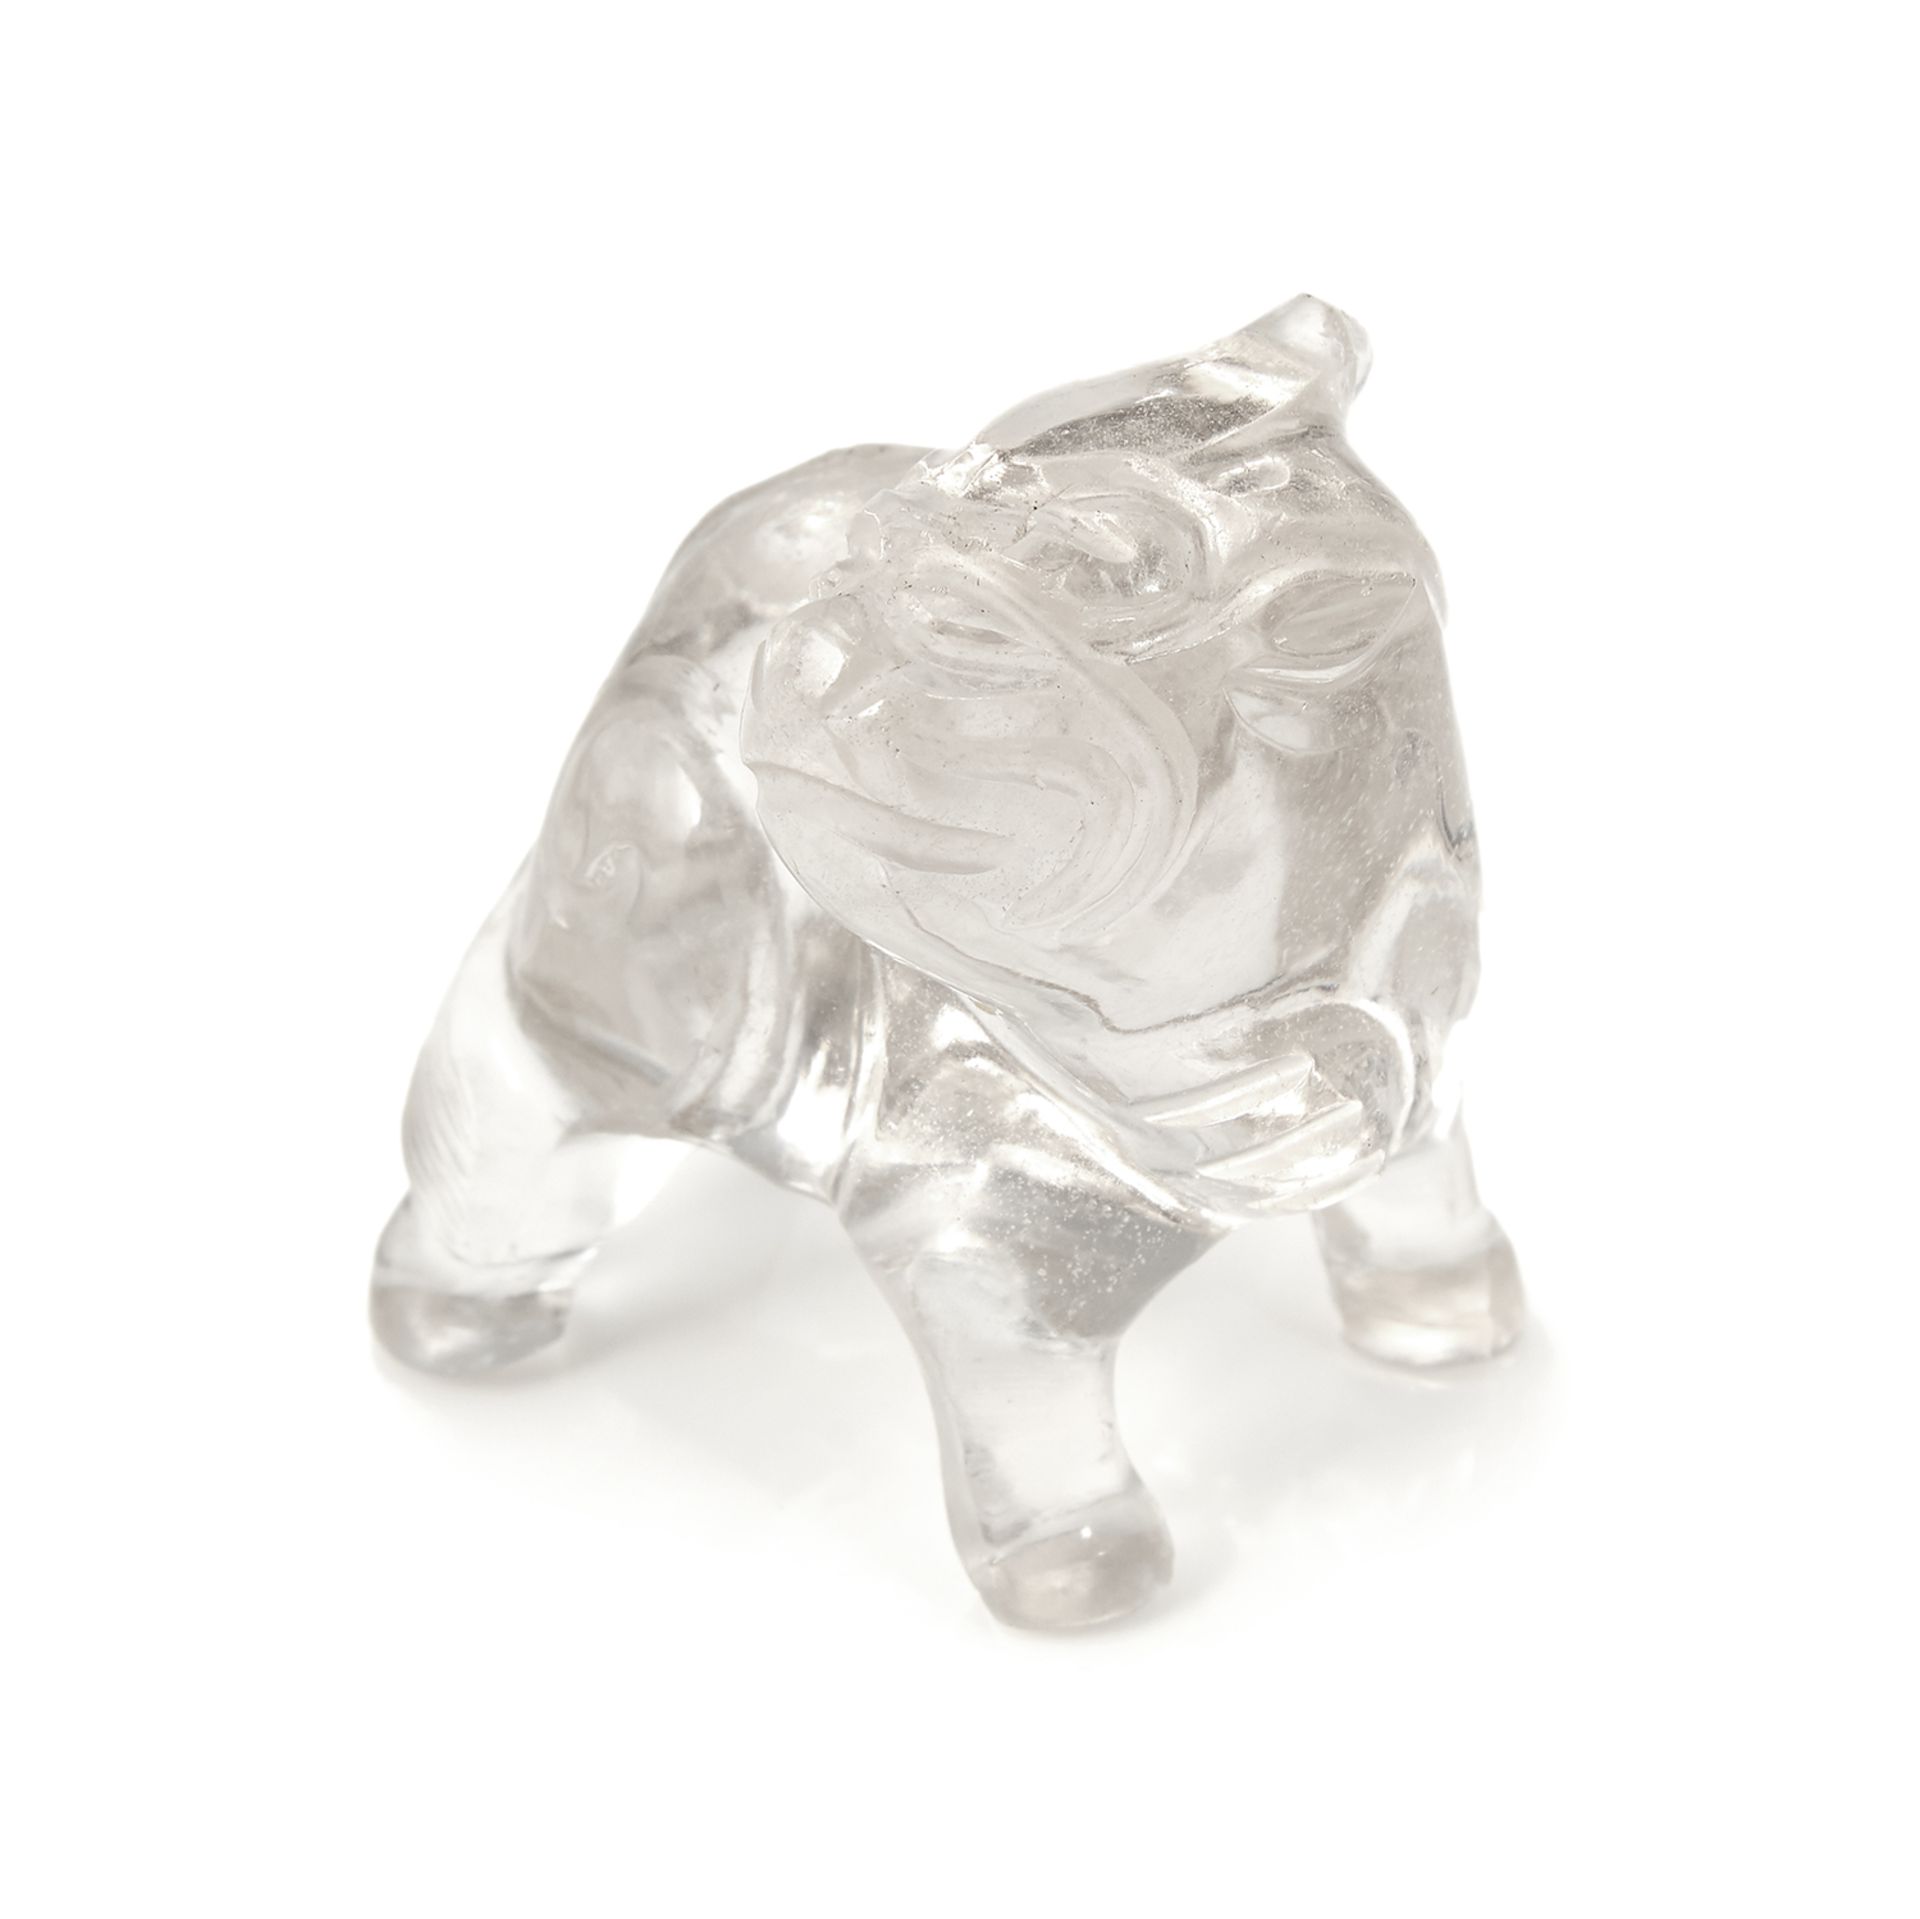 AN ANTIQUE CHINESE ROCK CRYSTAL DOG STATUE, QING DYNASTY carved from rock crystal to depict a